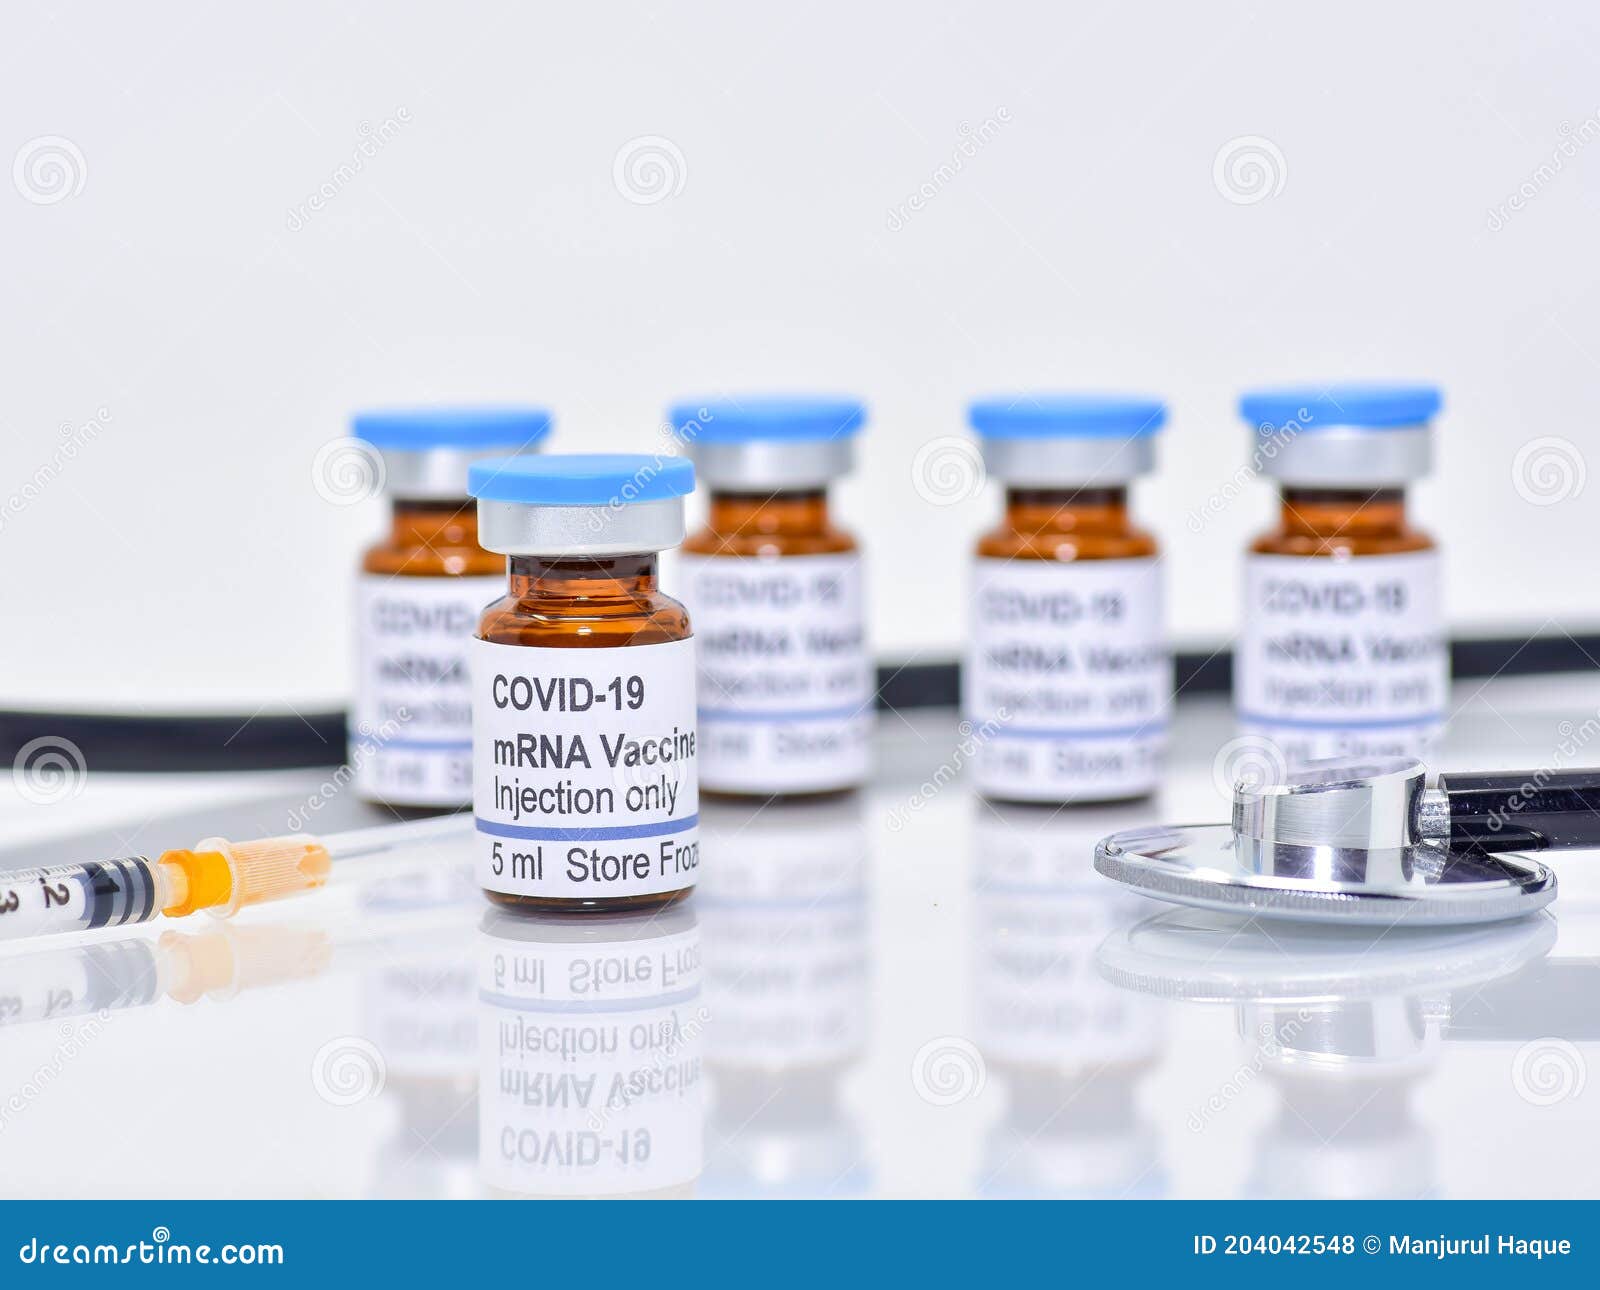 a fictional covid-19 mrna vaccine from pharmaceuticals